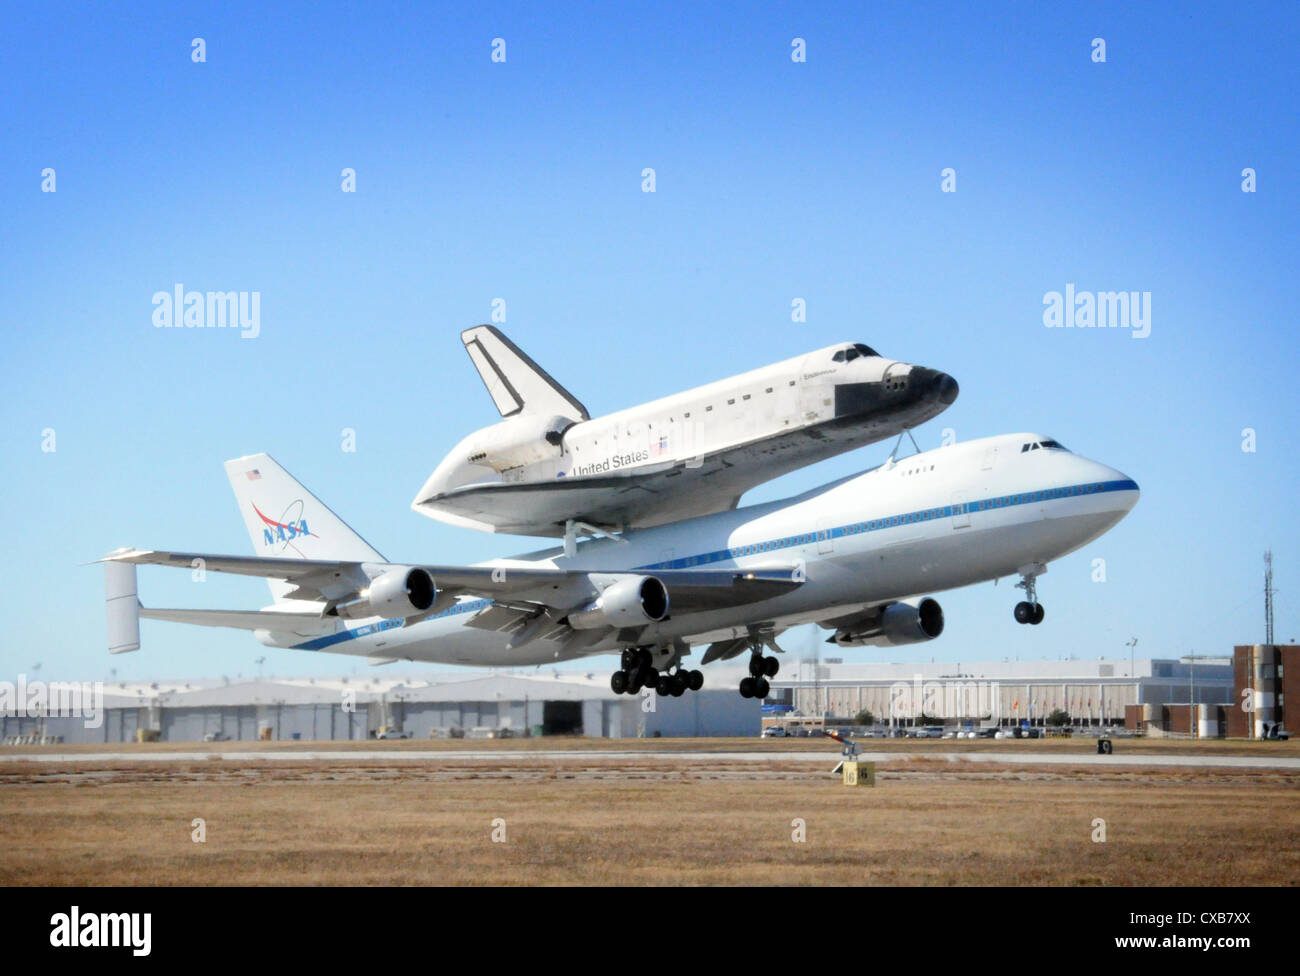 FORT WORTH (Dec. 10, 2008) The Space shuttle Endeavour, atop a modified Boeing 747, taxis toward the runway at Naval Air Station Joint Reserve Base, Fort Worth, Texas. The aircraft is on a cross-country trek back to the spacecraft's homeport at Kennedy Space Center, Florida Stock Photo